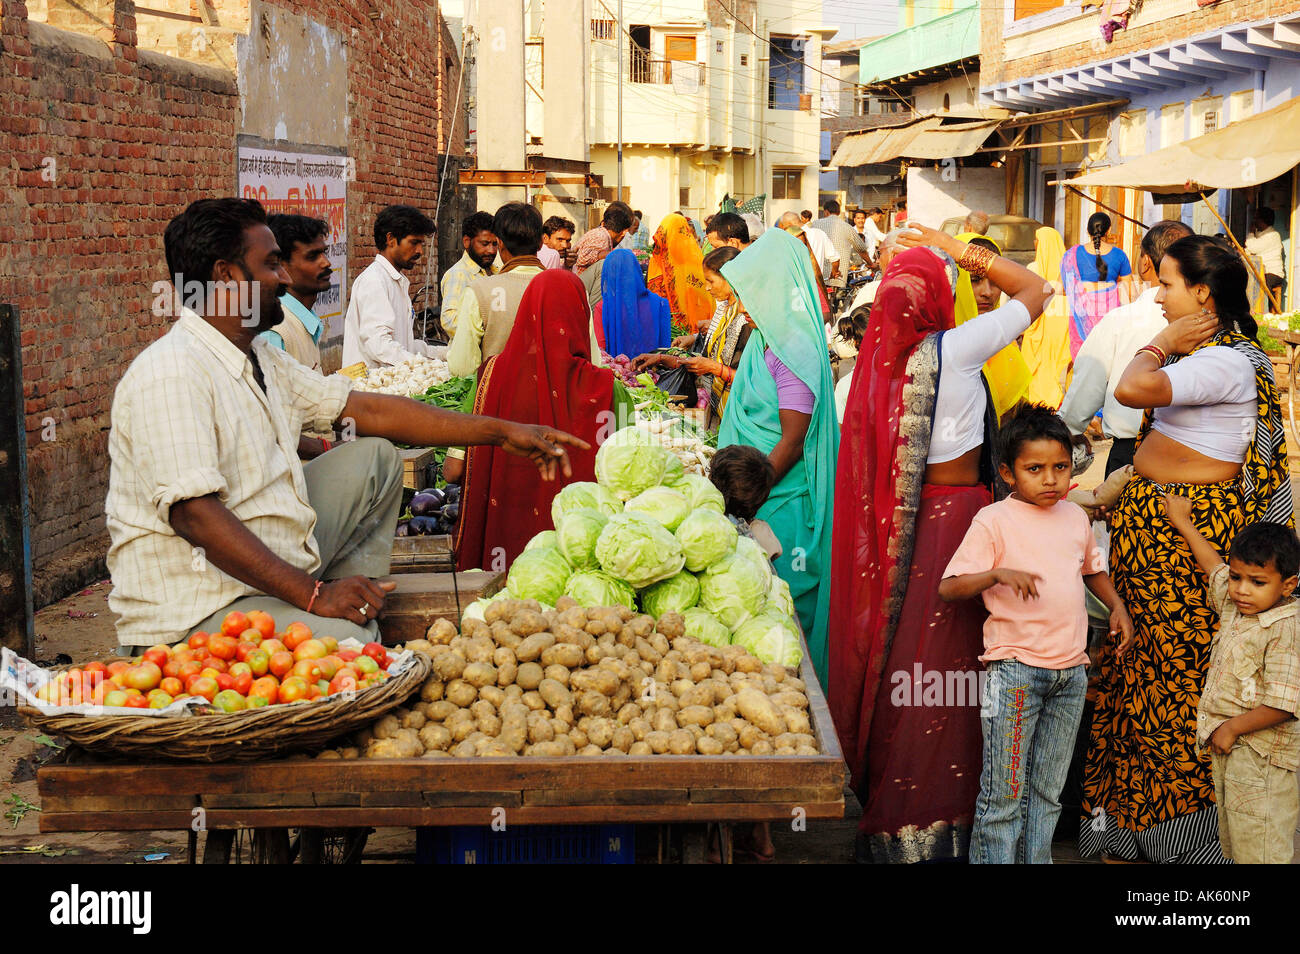 Market stall, Bharatpur Banque D'Images